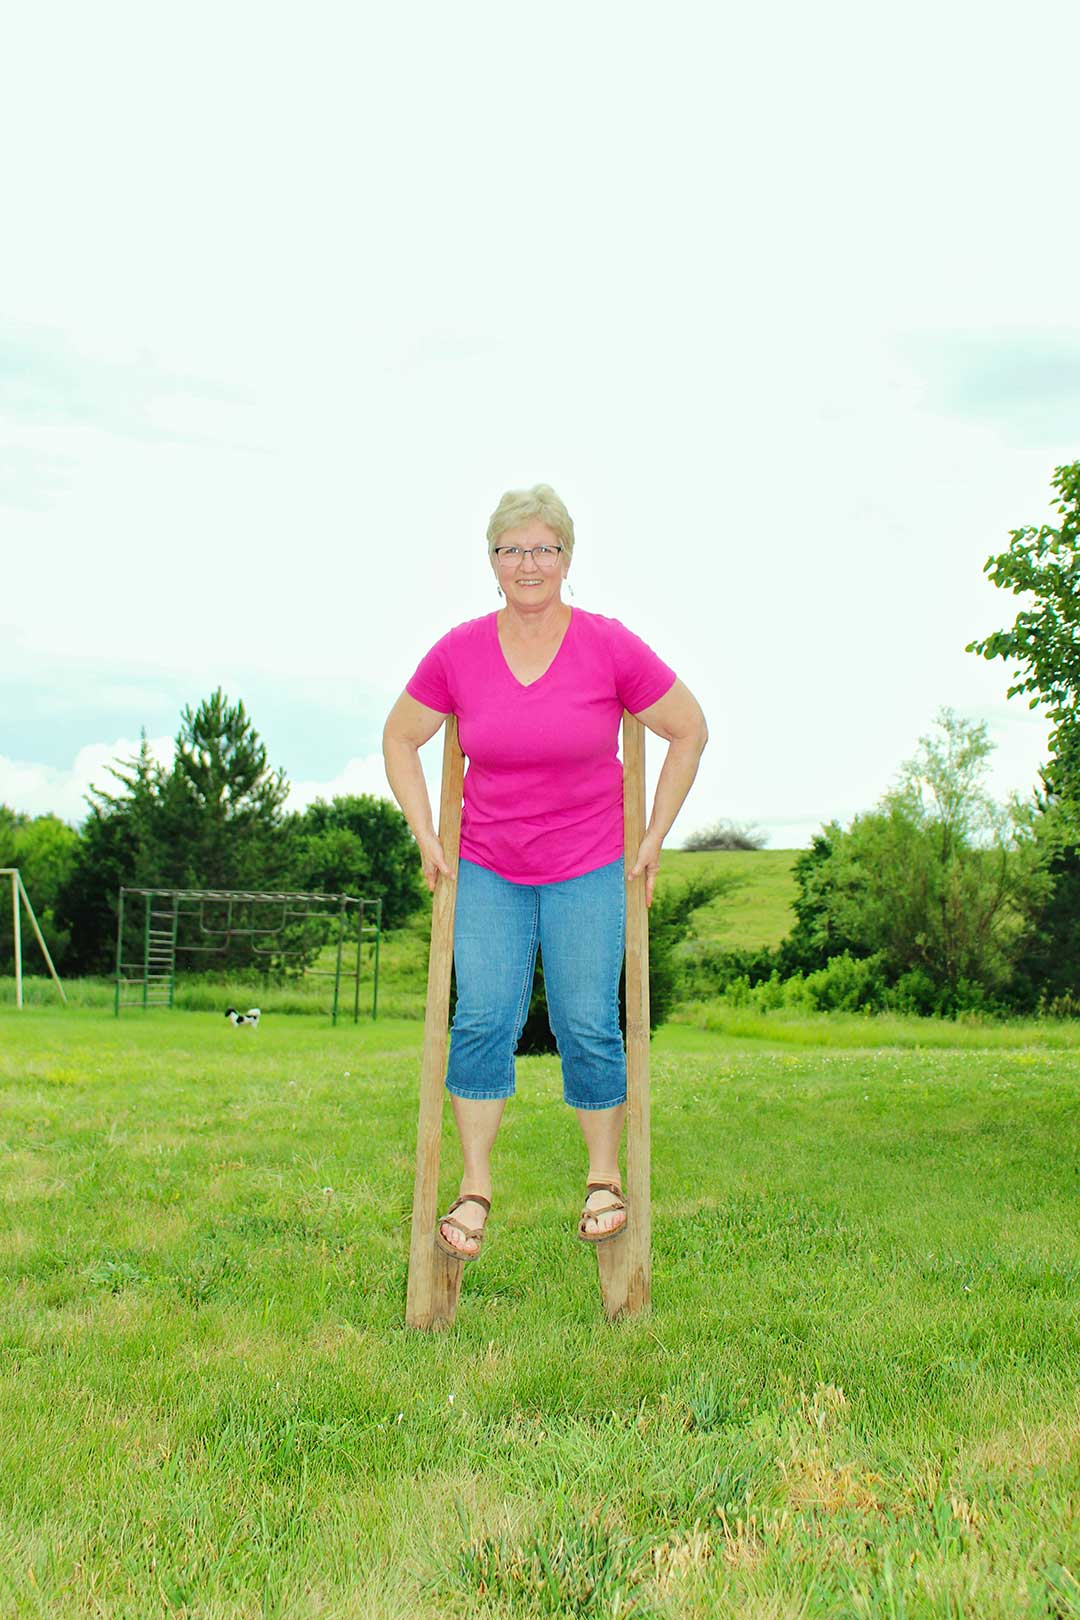 Nana smiling on stilts wearing bright pink shirt and jeans.